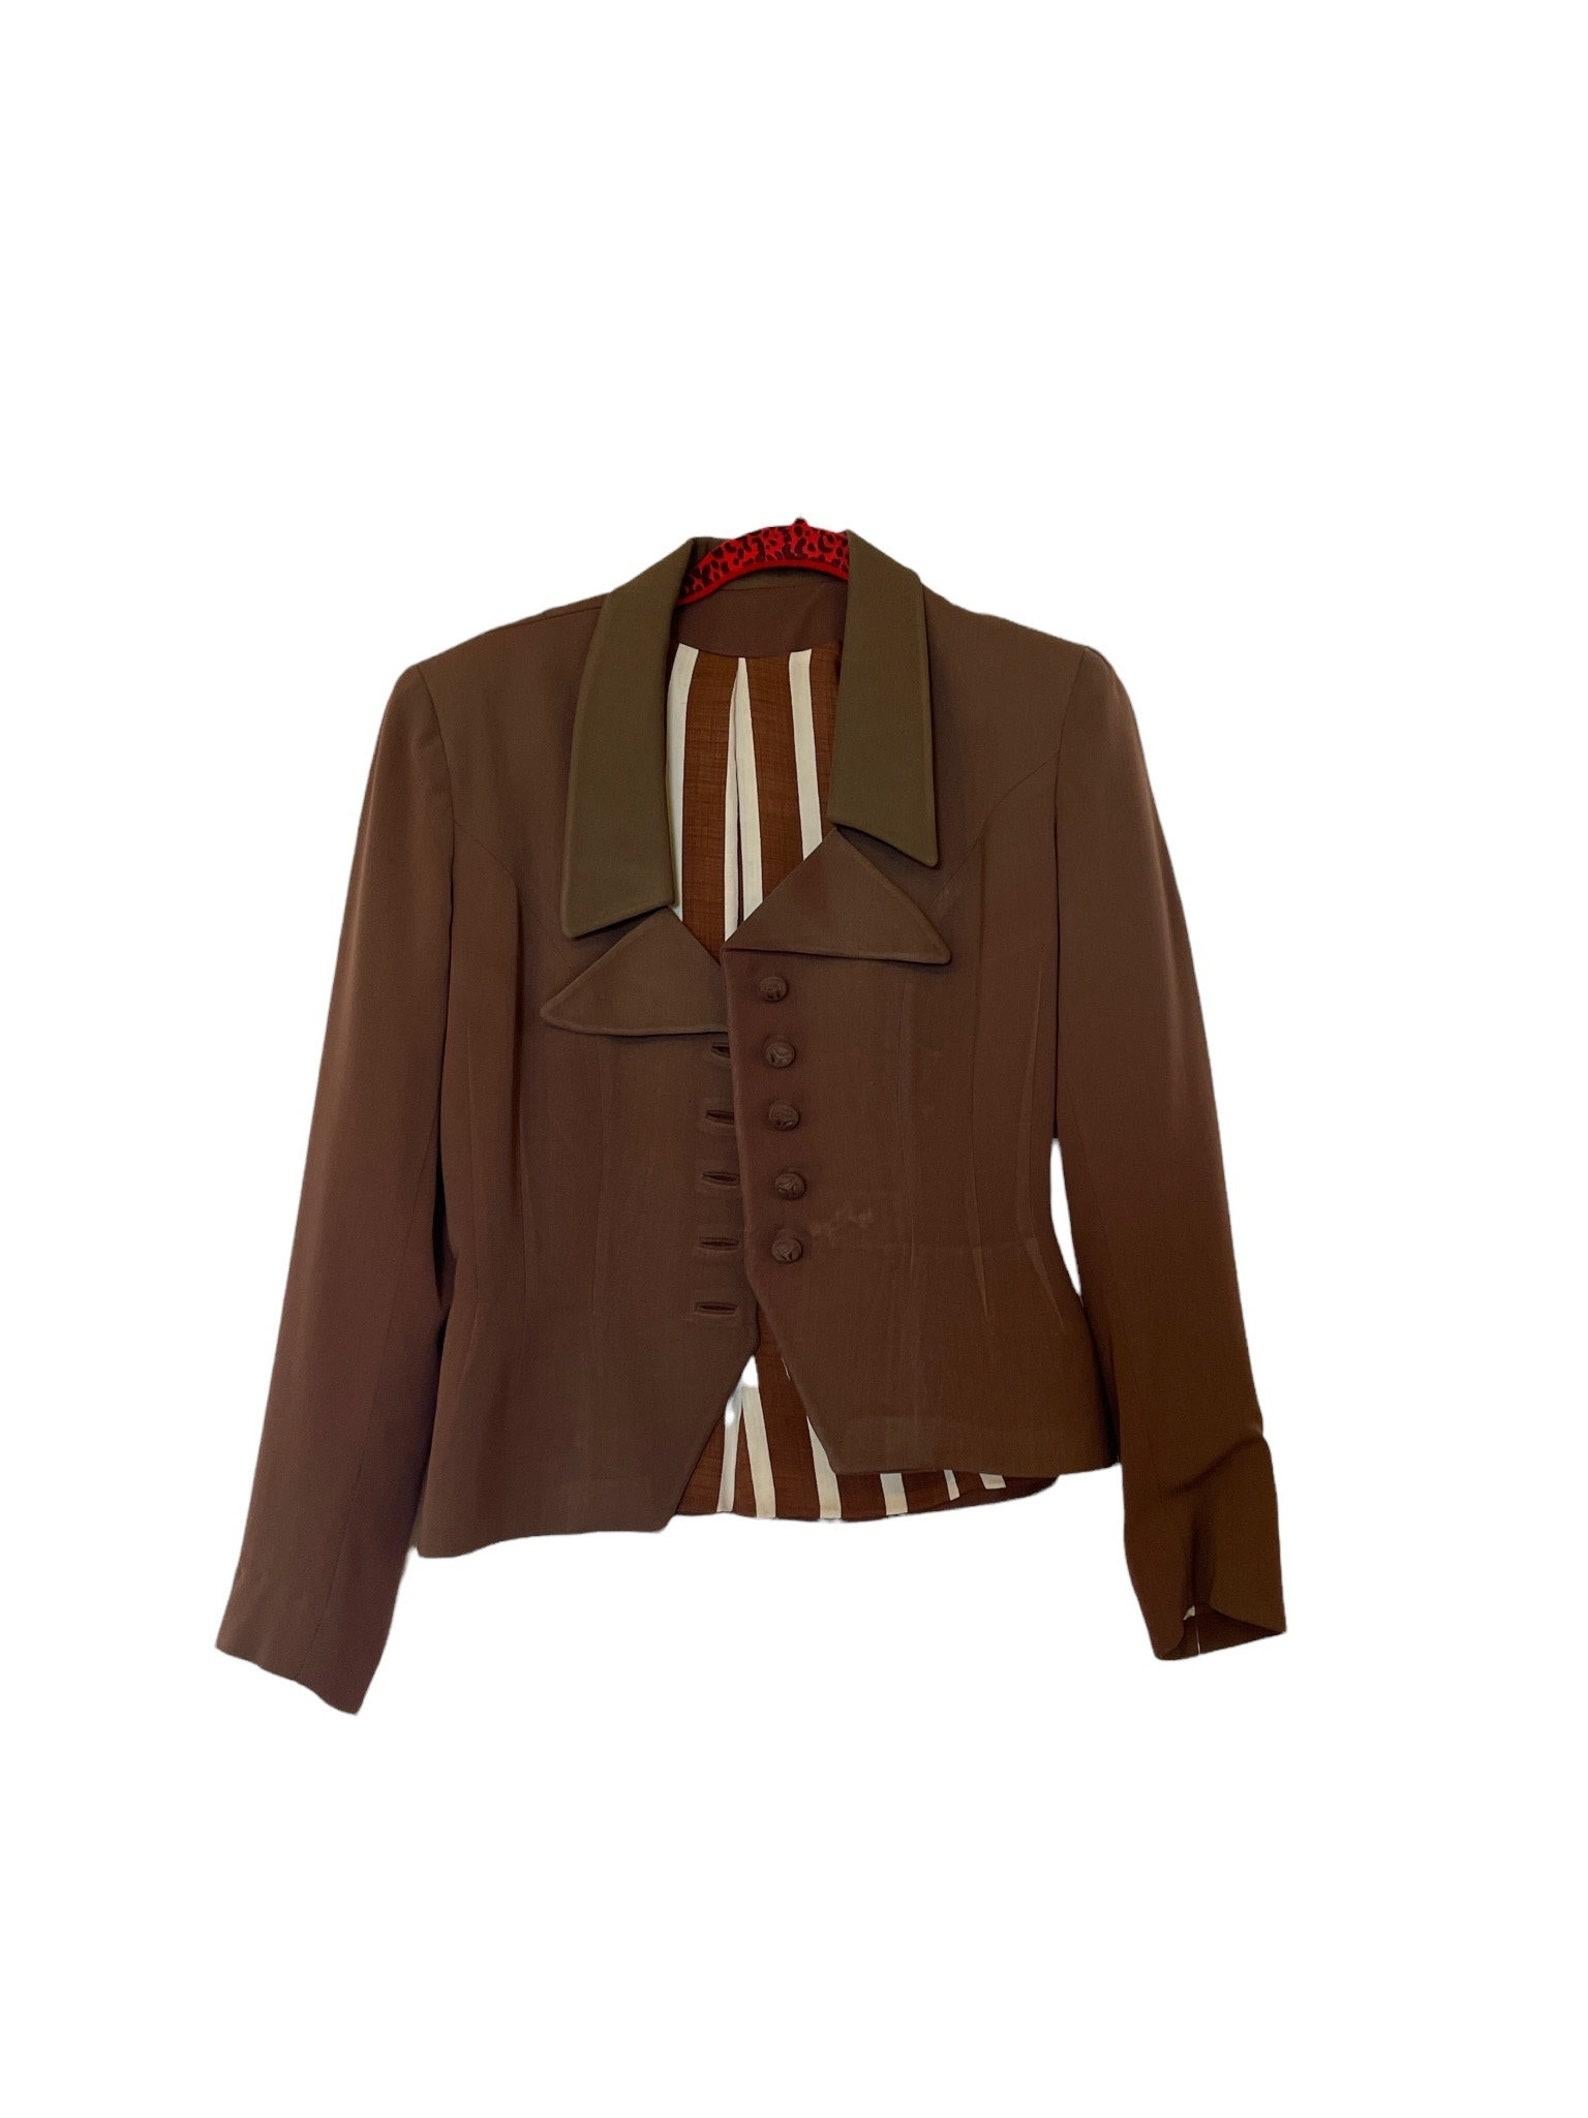 1940s House of Erdrich Brown Jacket For Sale 3